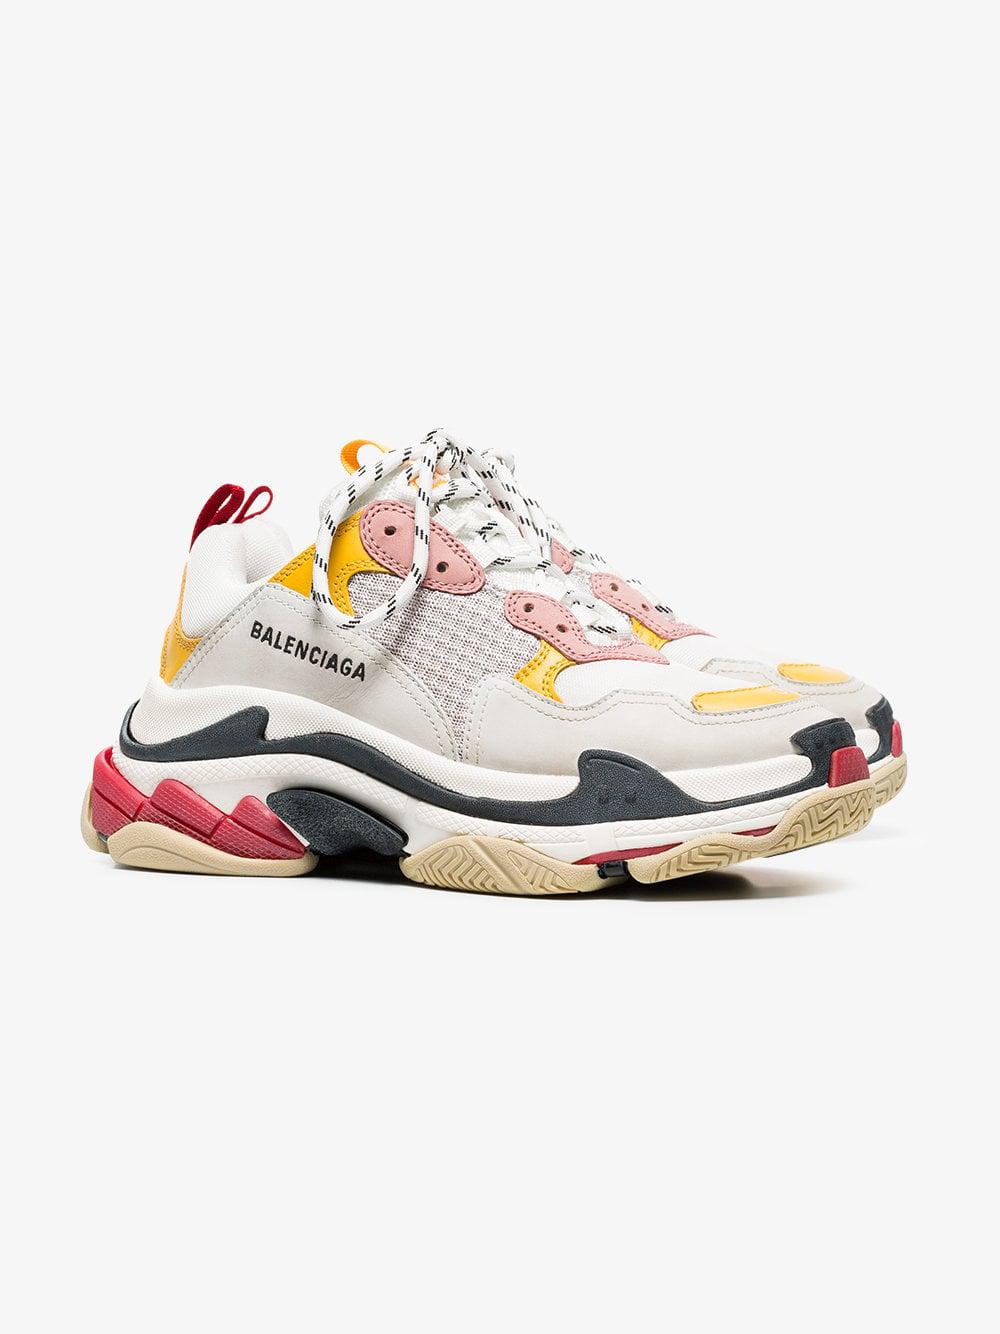 Balenciaga White, Pink And Yellow Triple S Leather Sneakers - Lyst